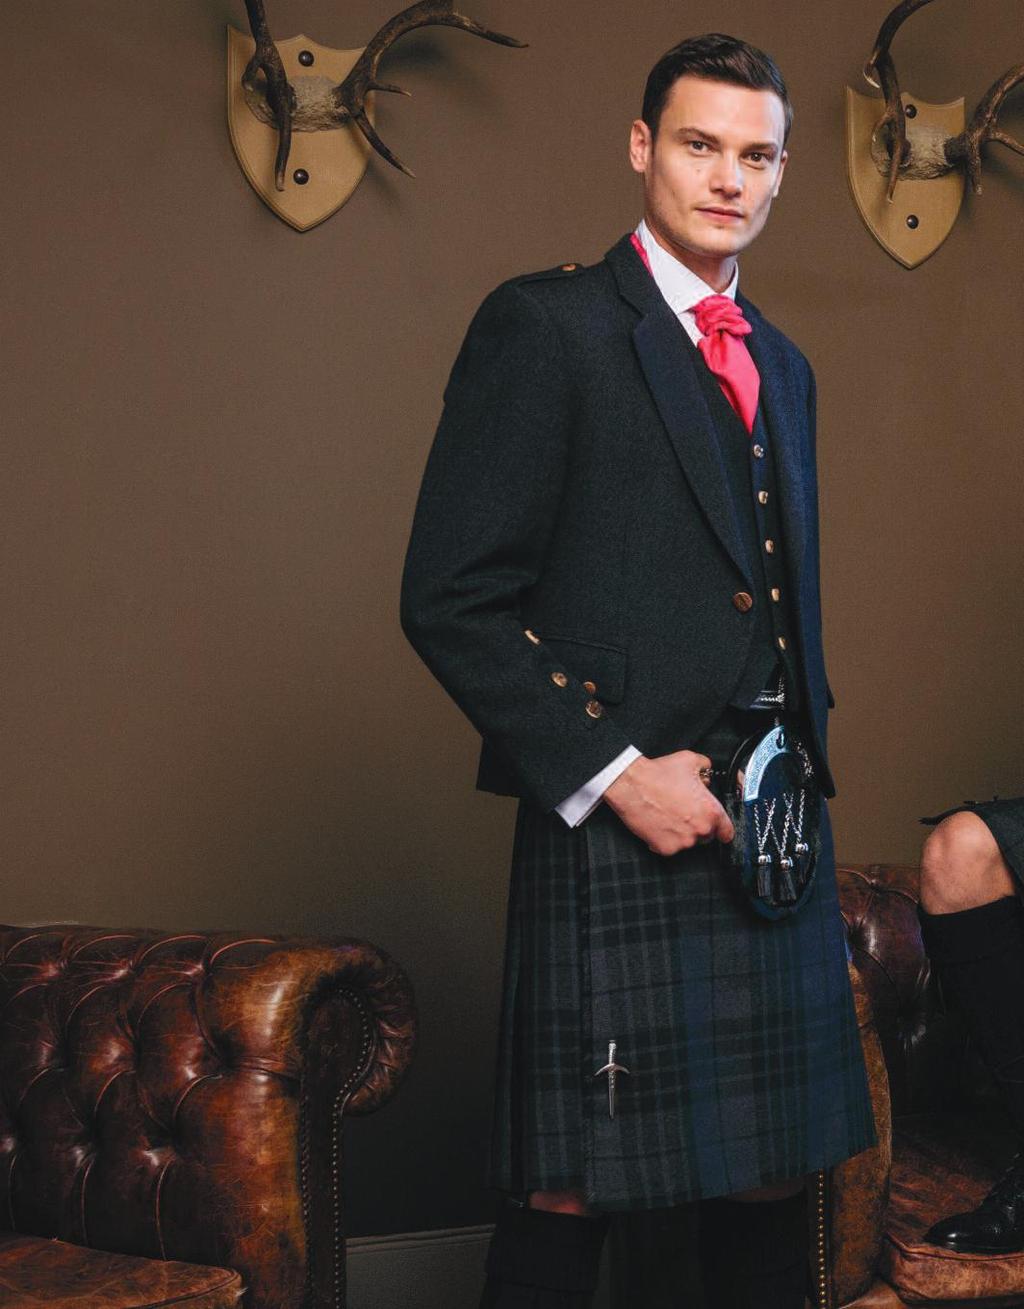 Grey Spirit Kilt Worn with Grey Tweed Jacket, matching waistcoat and Raspberry ruche Times may change and fashions come and go, but one thing remains absolutely